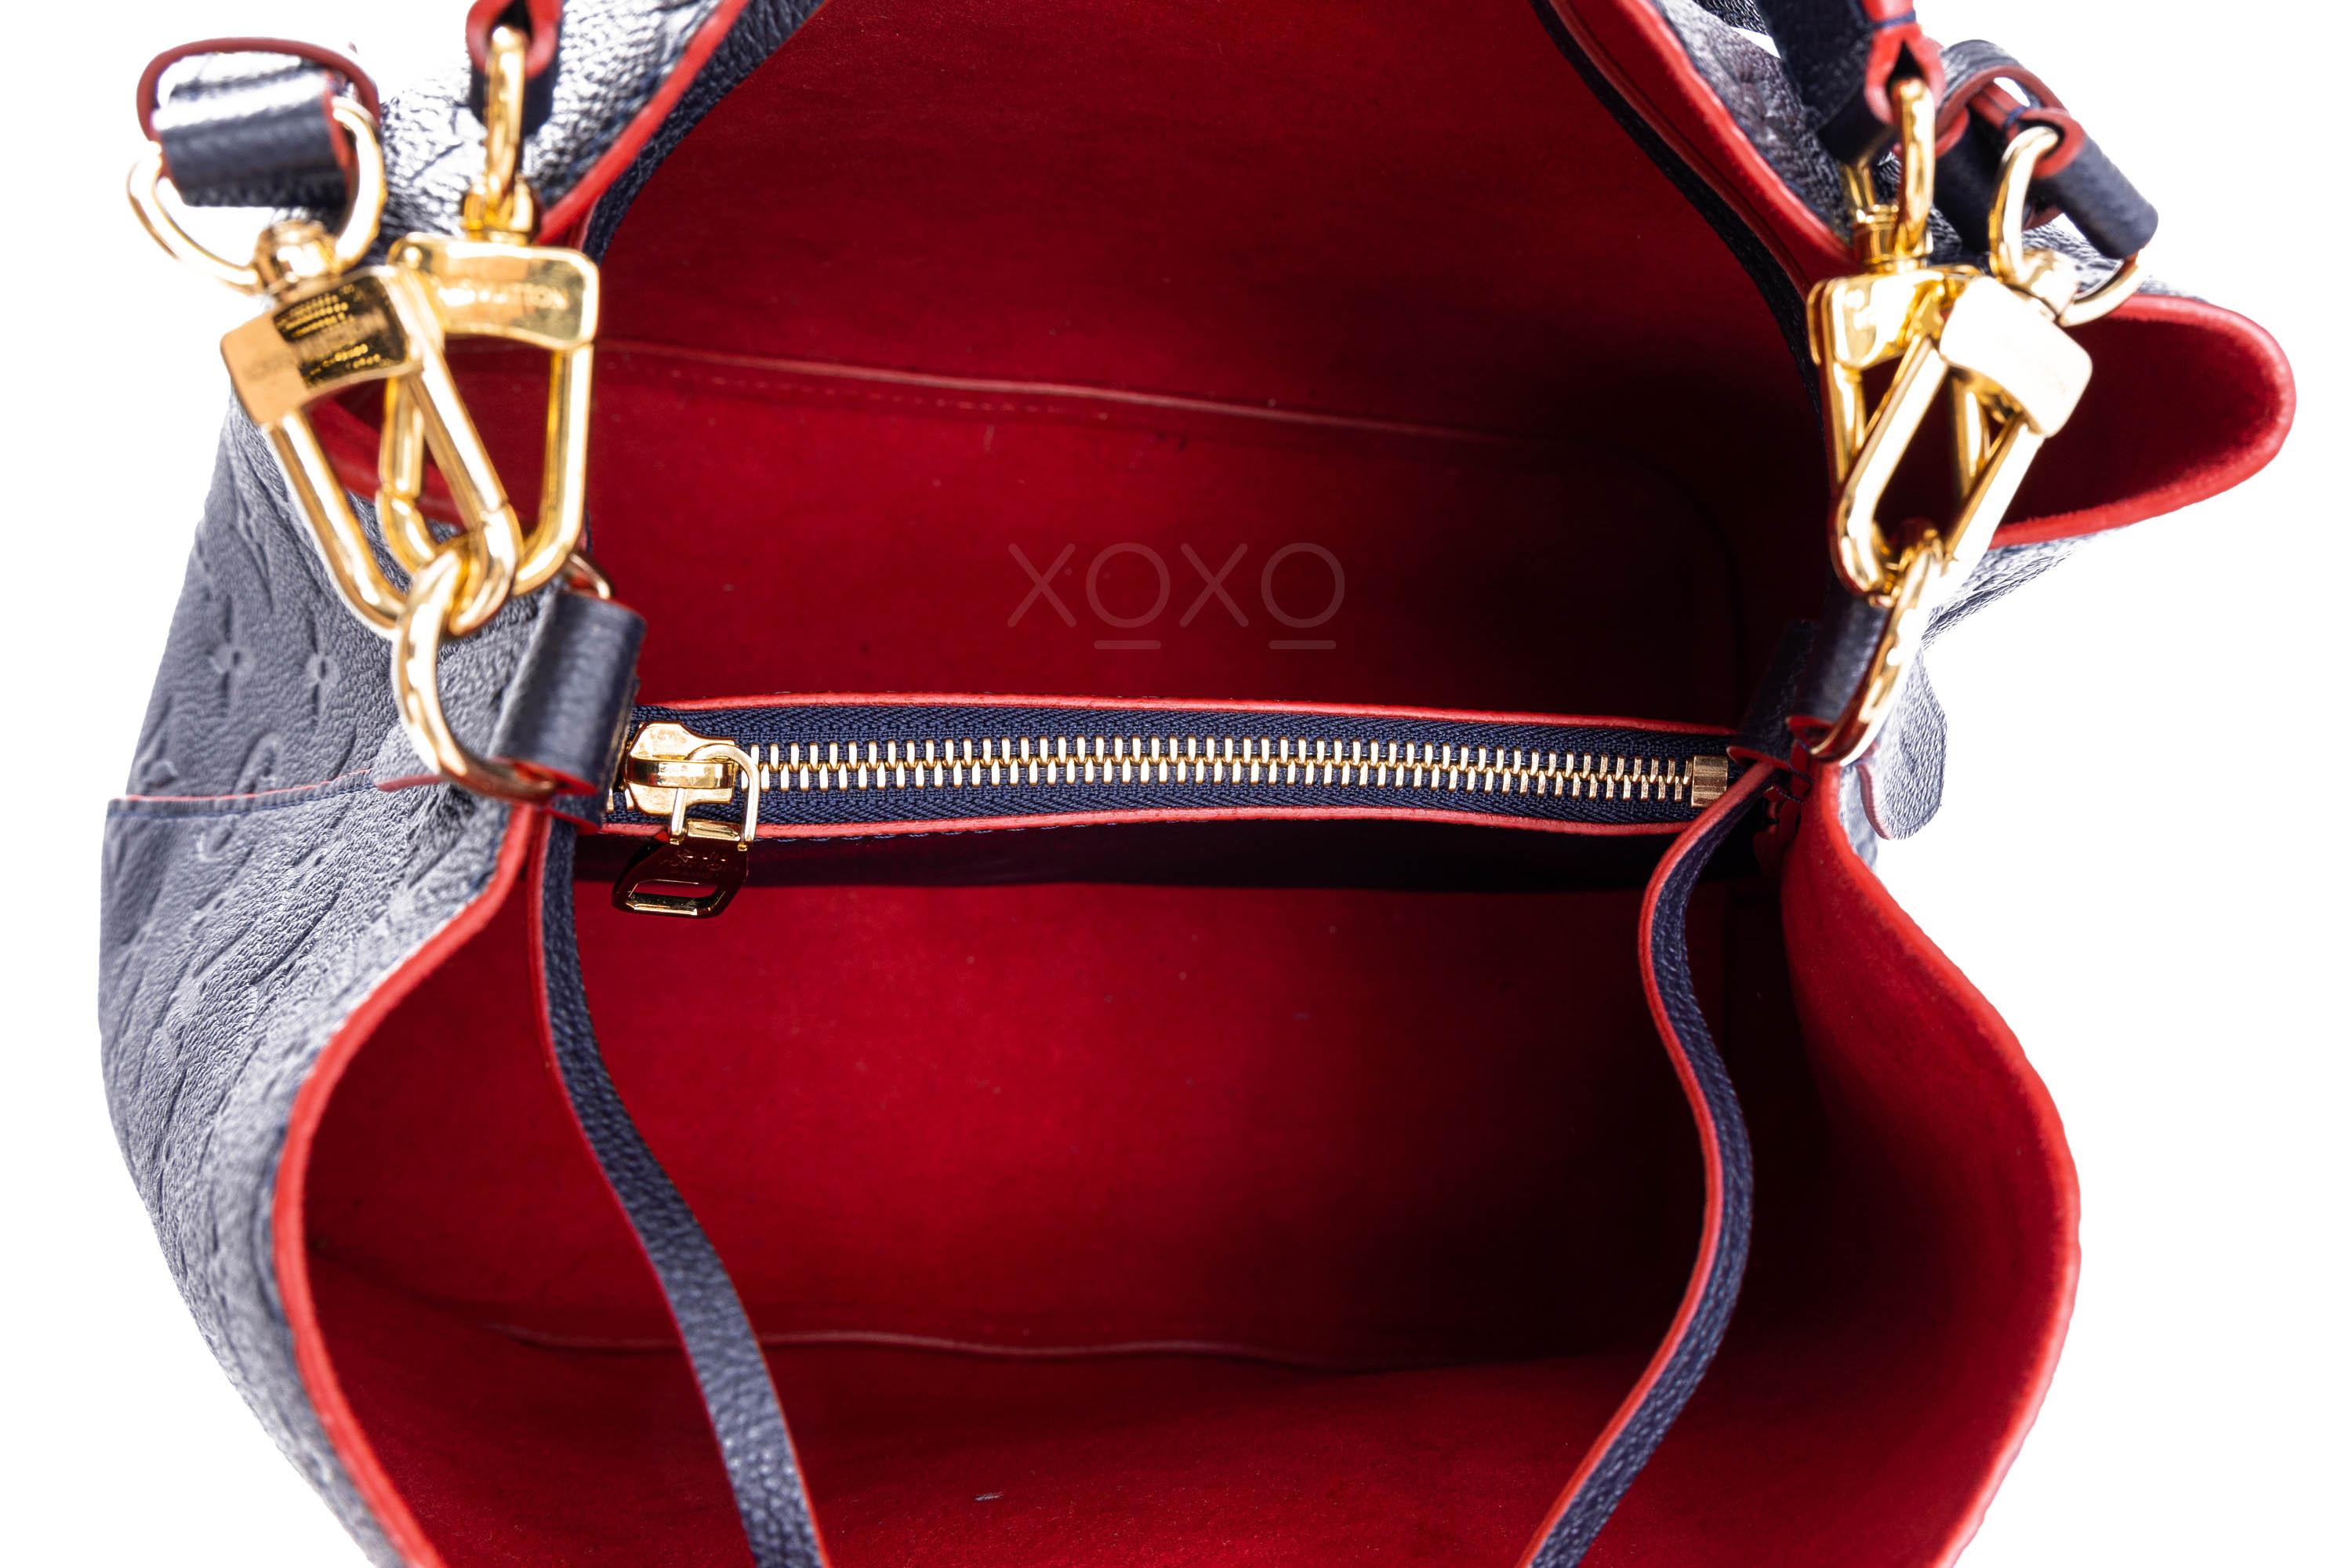 Sold at Auction: Louis Vuitton, Louis Vuitton: a Marine and Rouge Empreinte  Leather NeoNoe MM Bucket Bag c.2020 (includes dust bag and box)